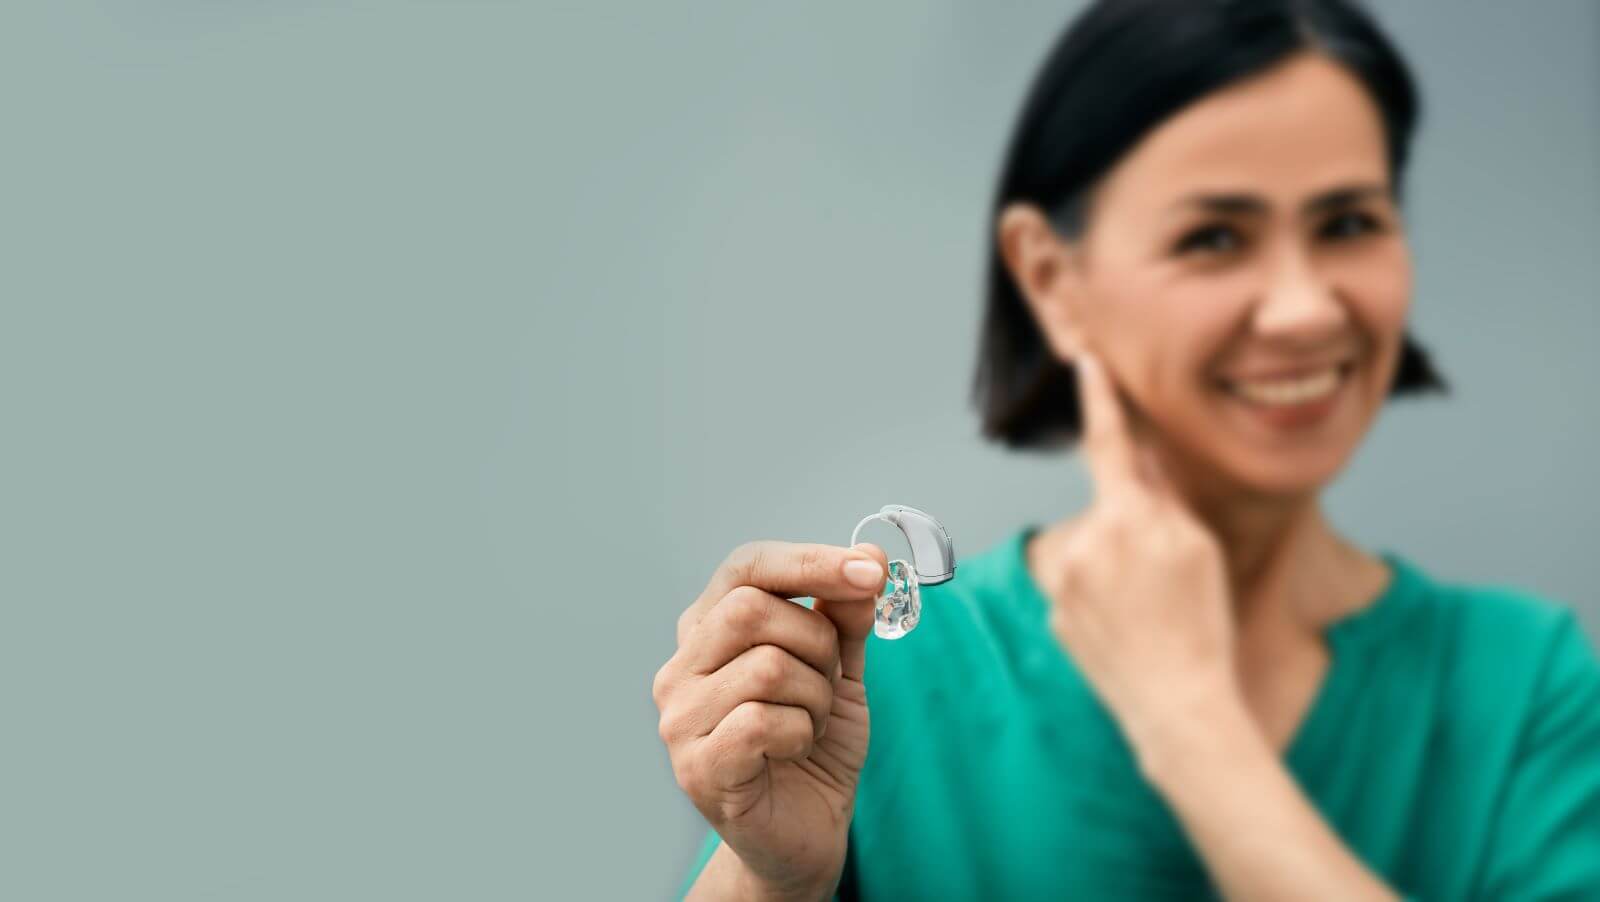 Featured image for “All About Bluetooth Hearing Aids”